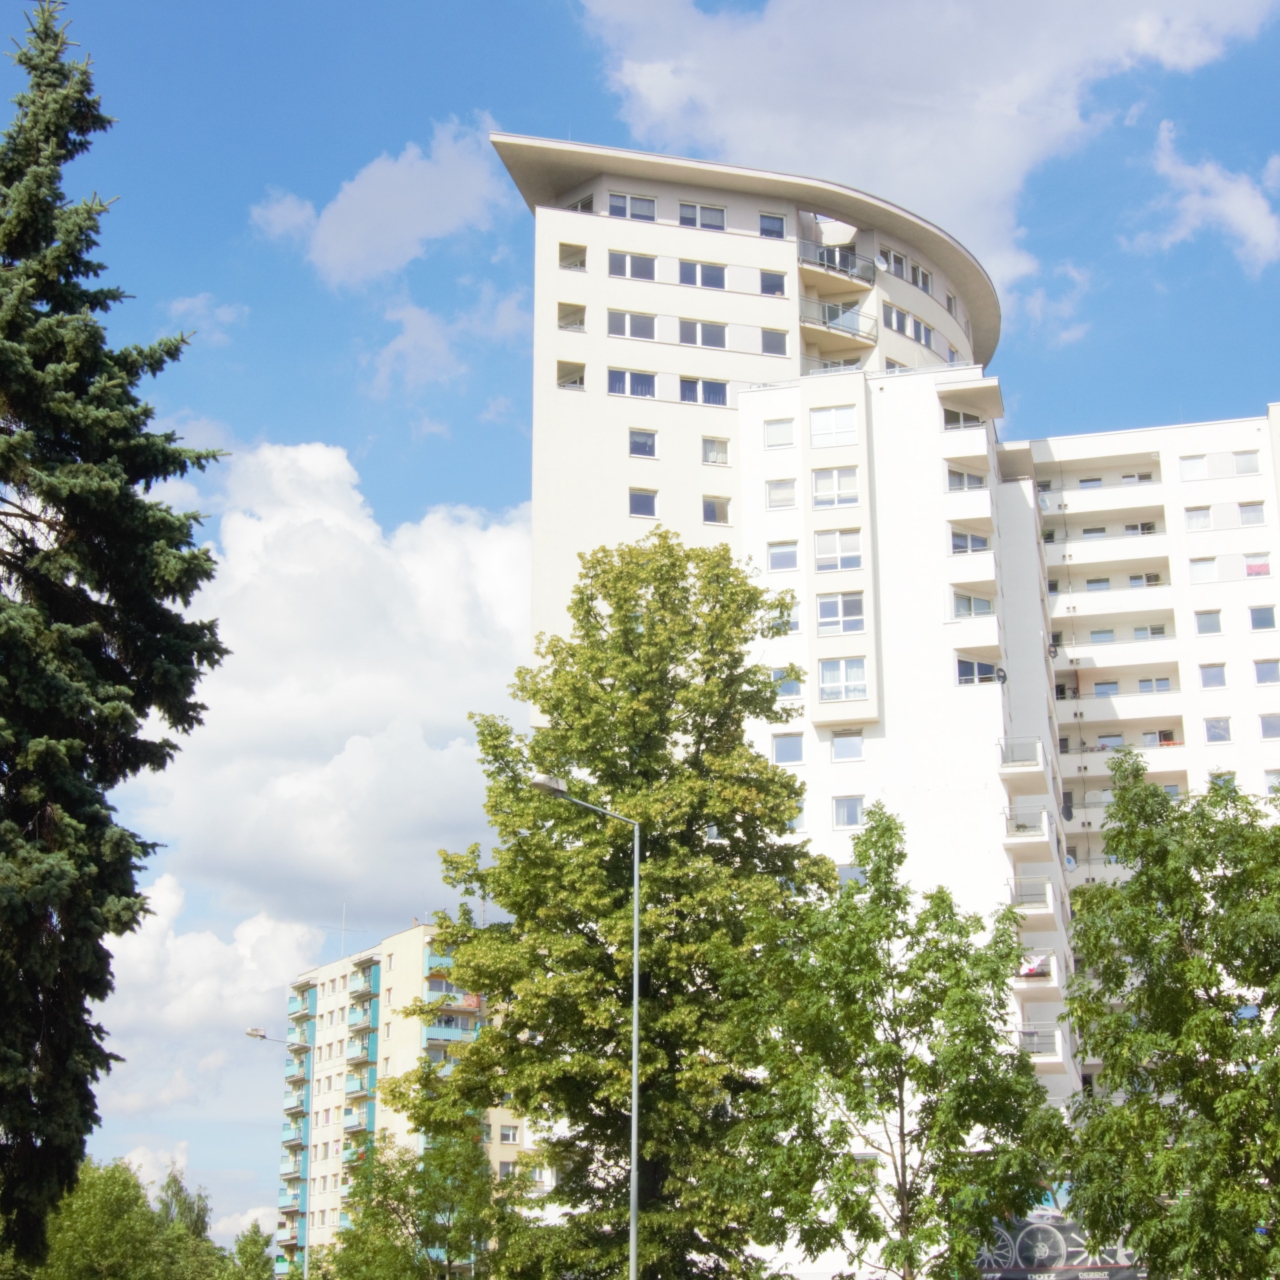 Hotel Apartments In High Tower Szczecin At Hrs With Free Services